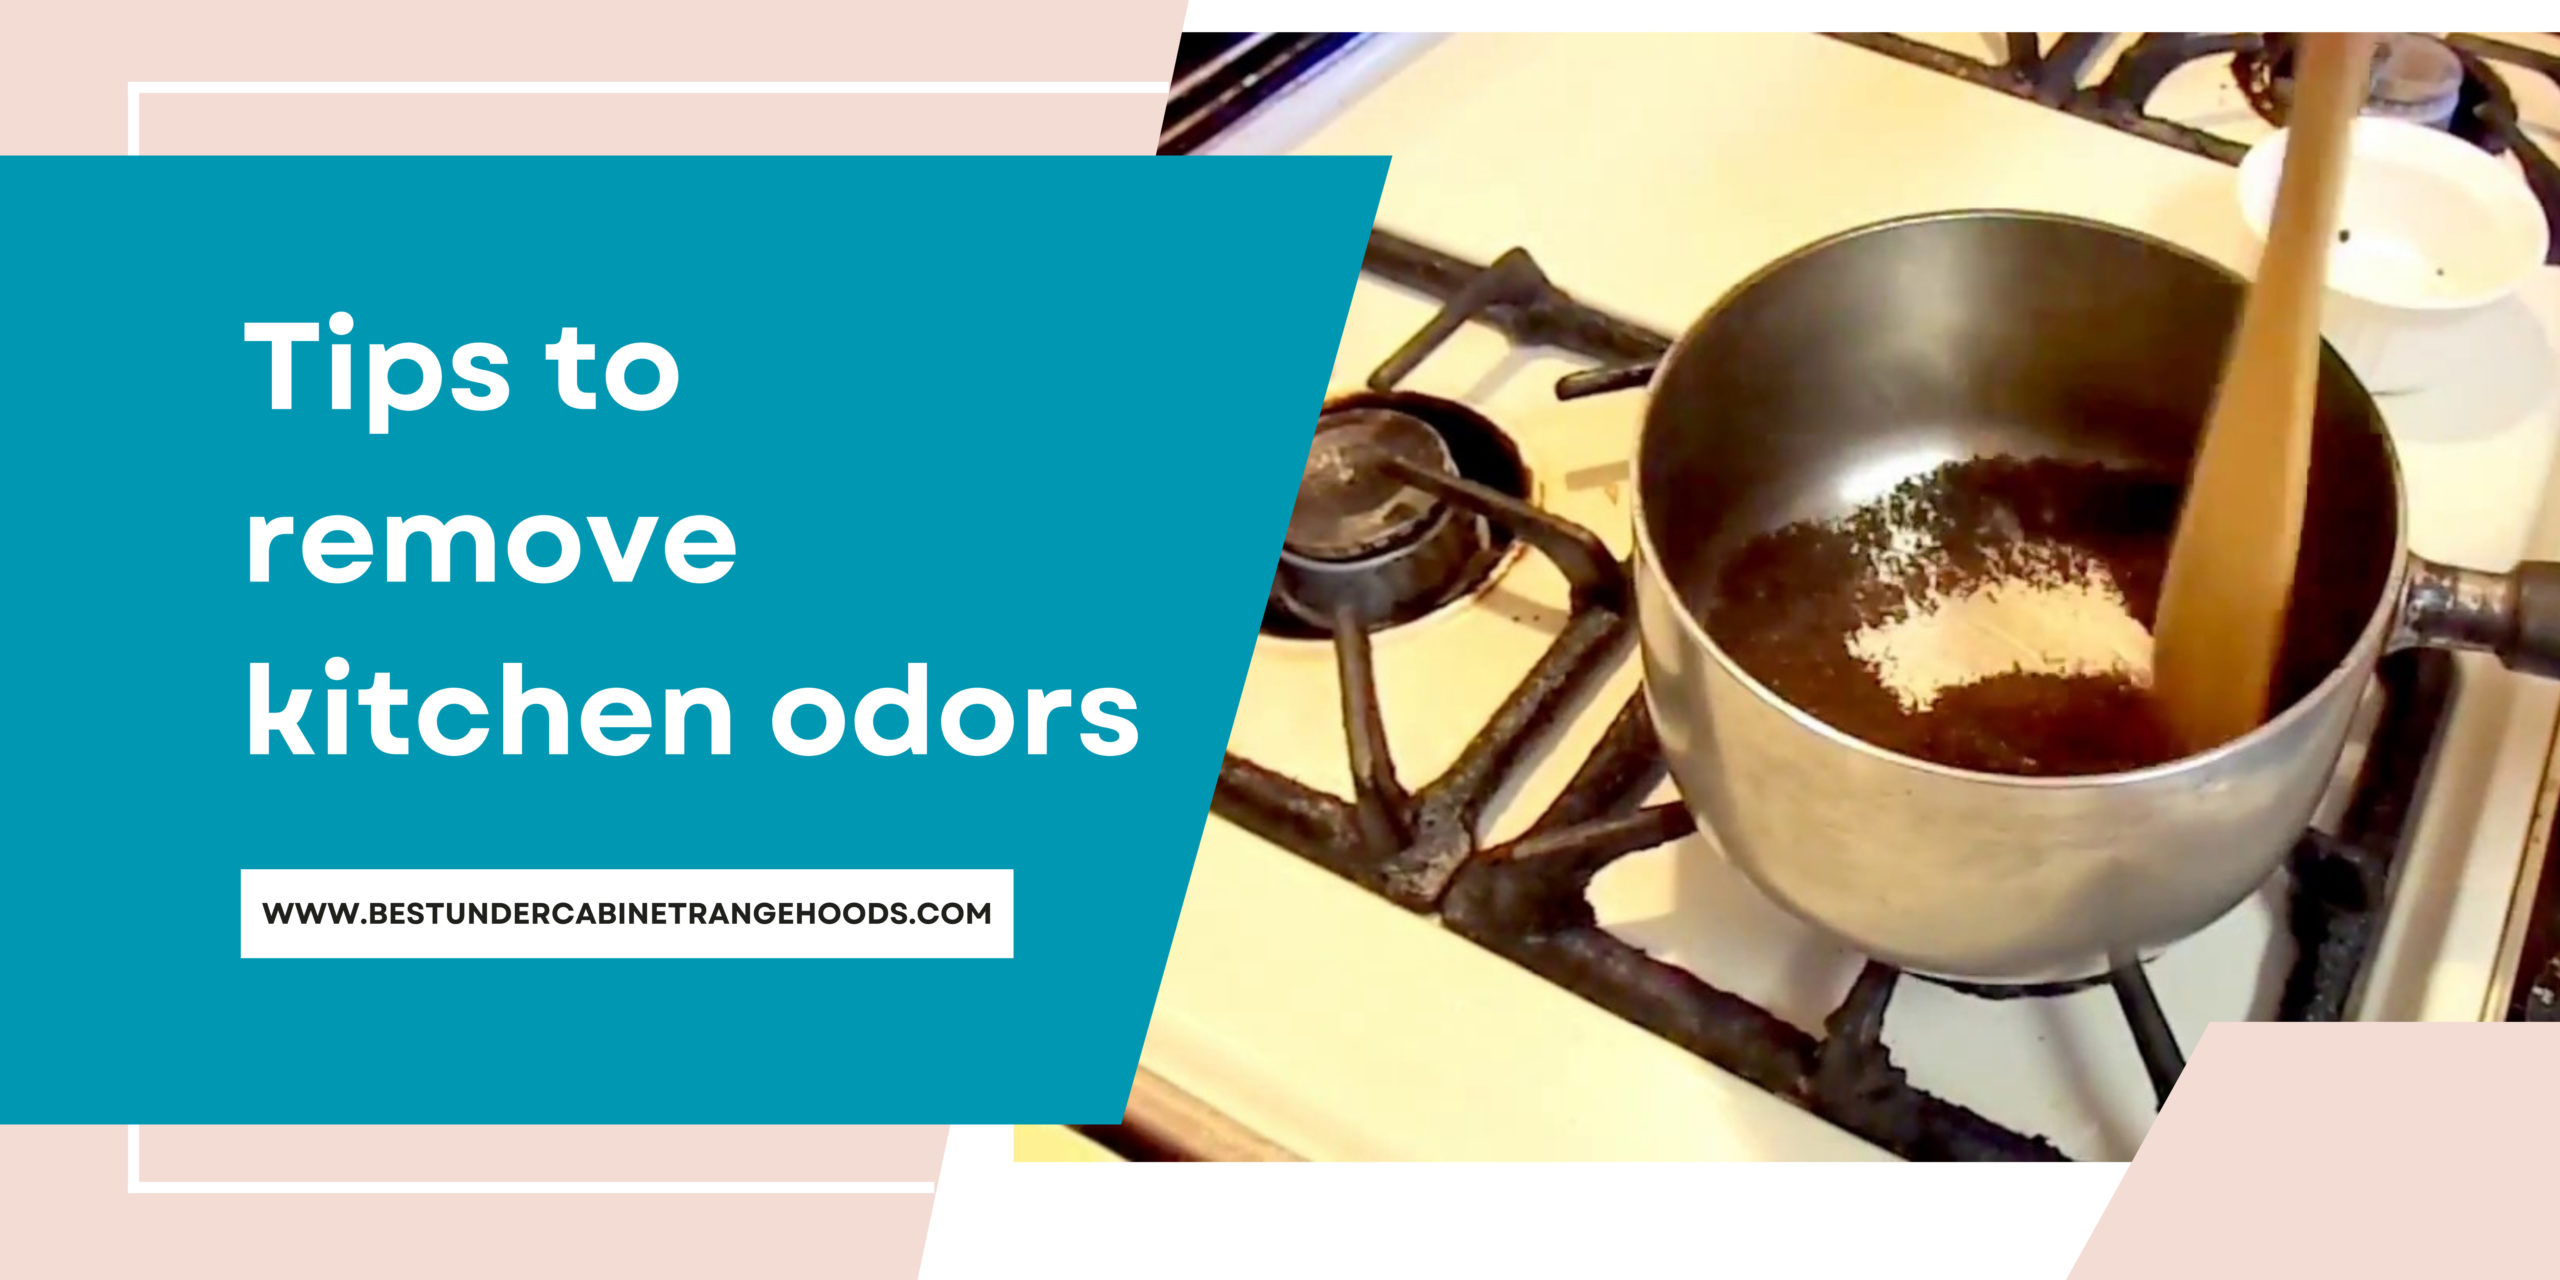 Tips To Remove Kitchen Odors Scaled 